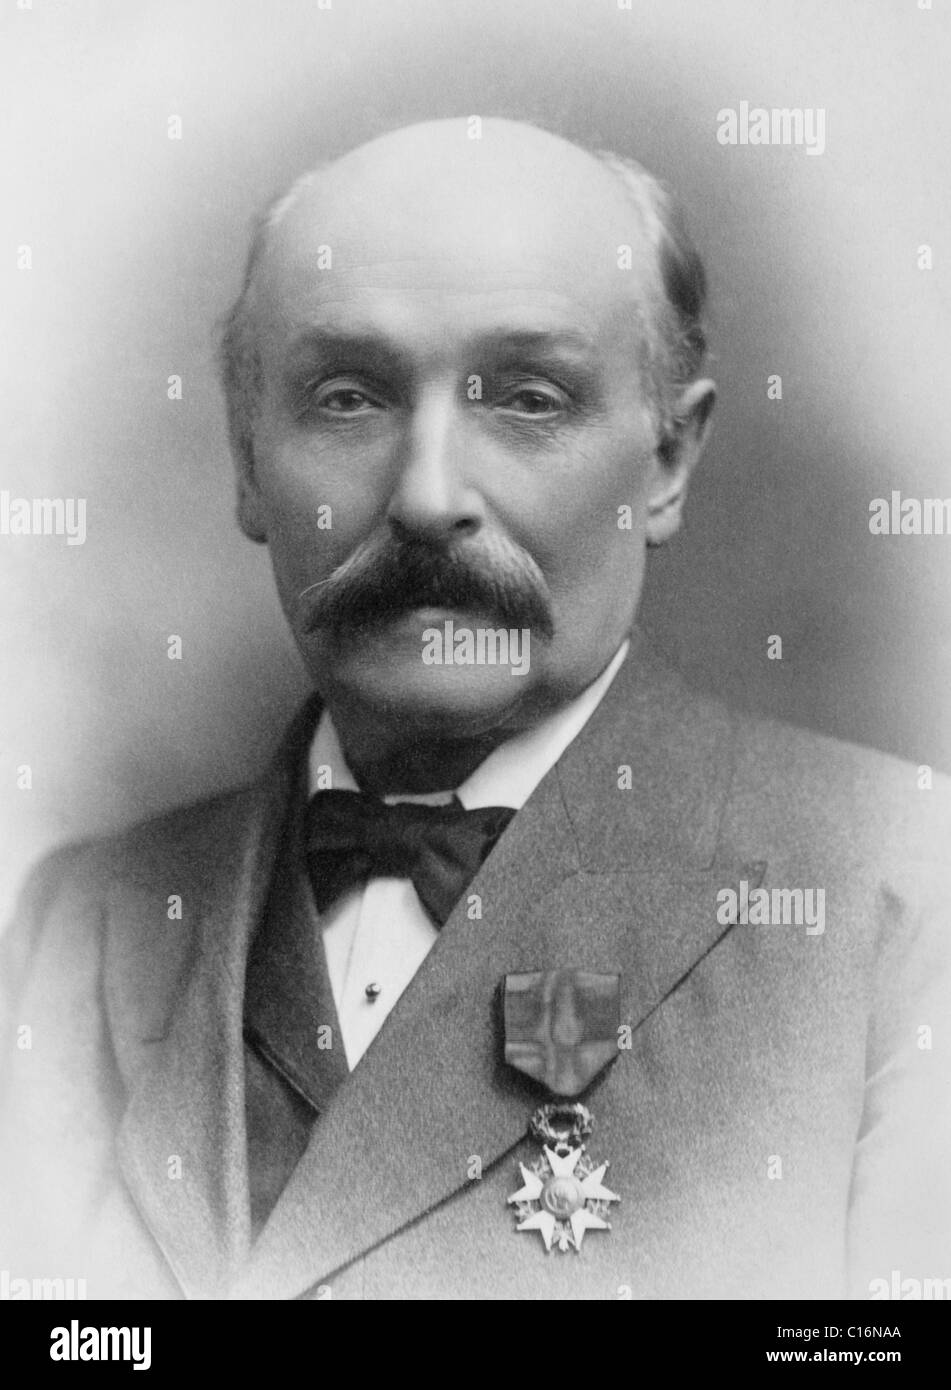 English politician and pacifist Sir William Randal Cremer (1828 - 1908) - winner of the Nobel Peace Prize in 1903. Stock Photo